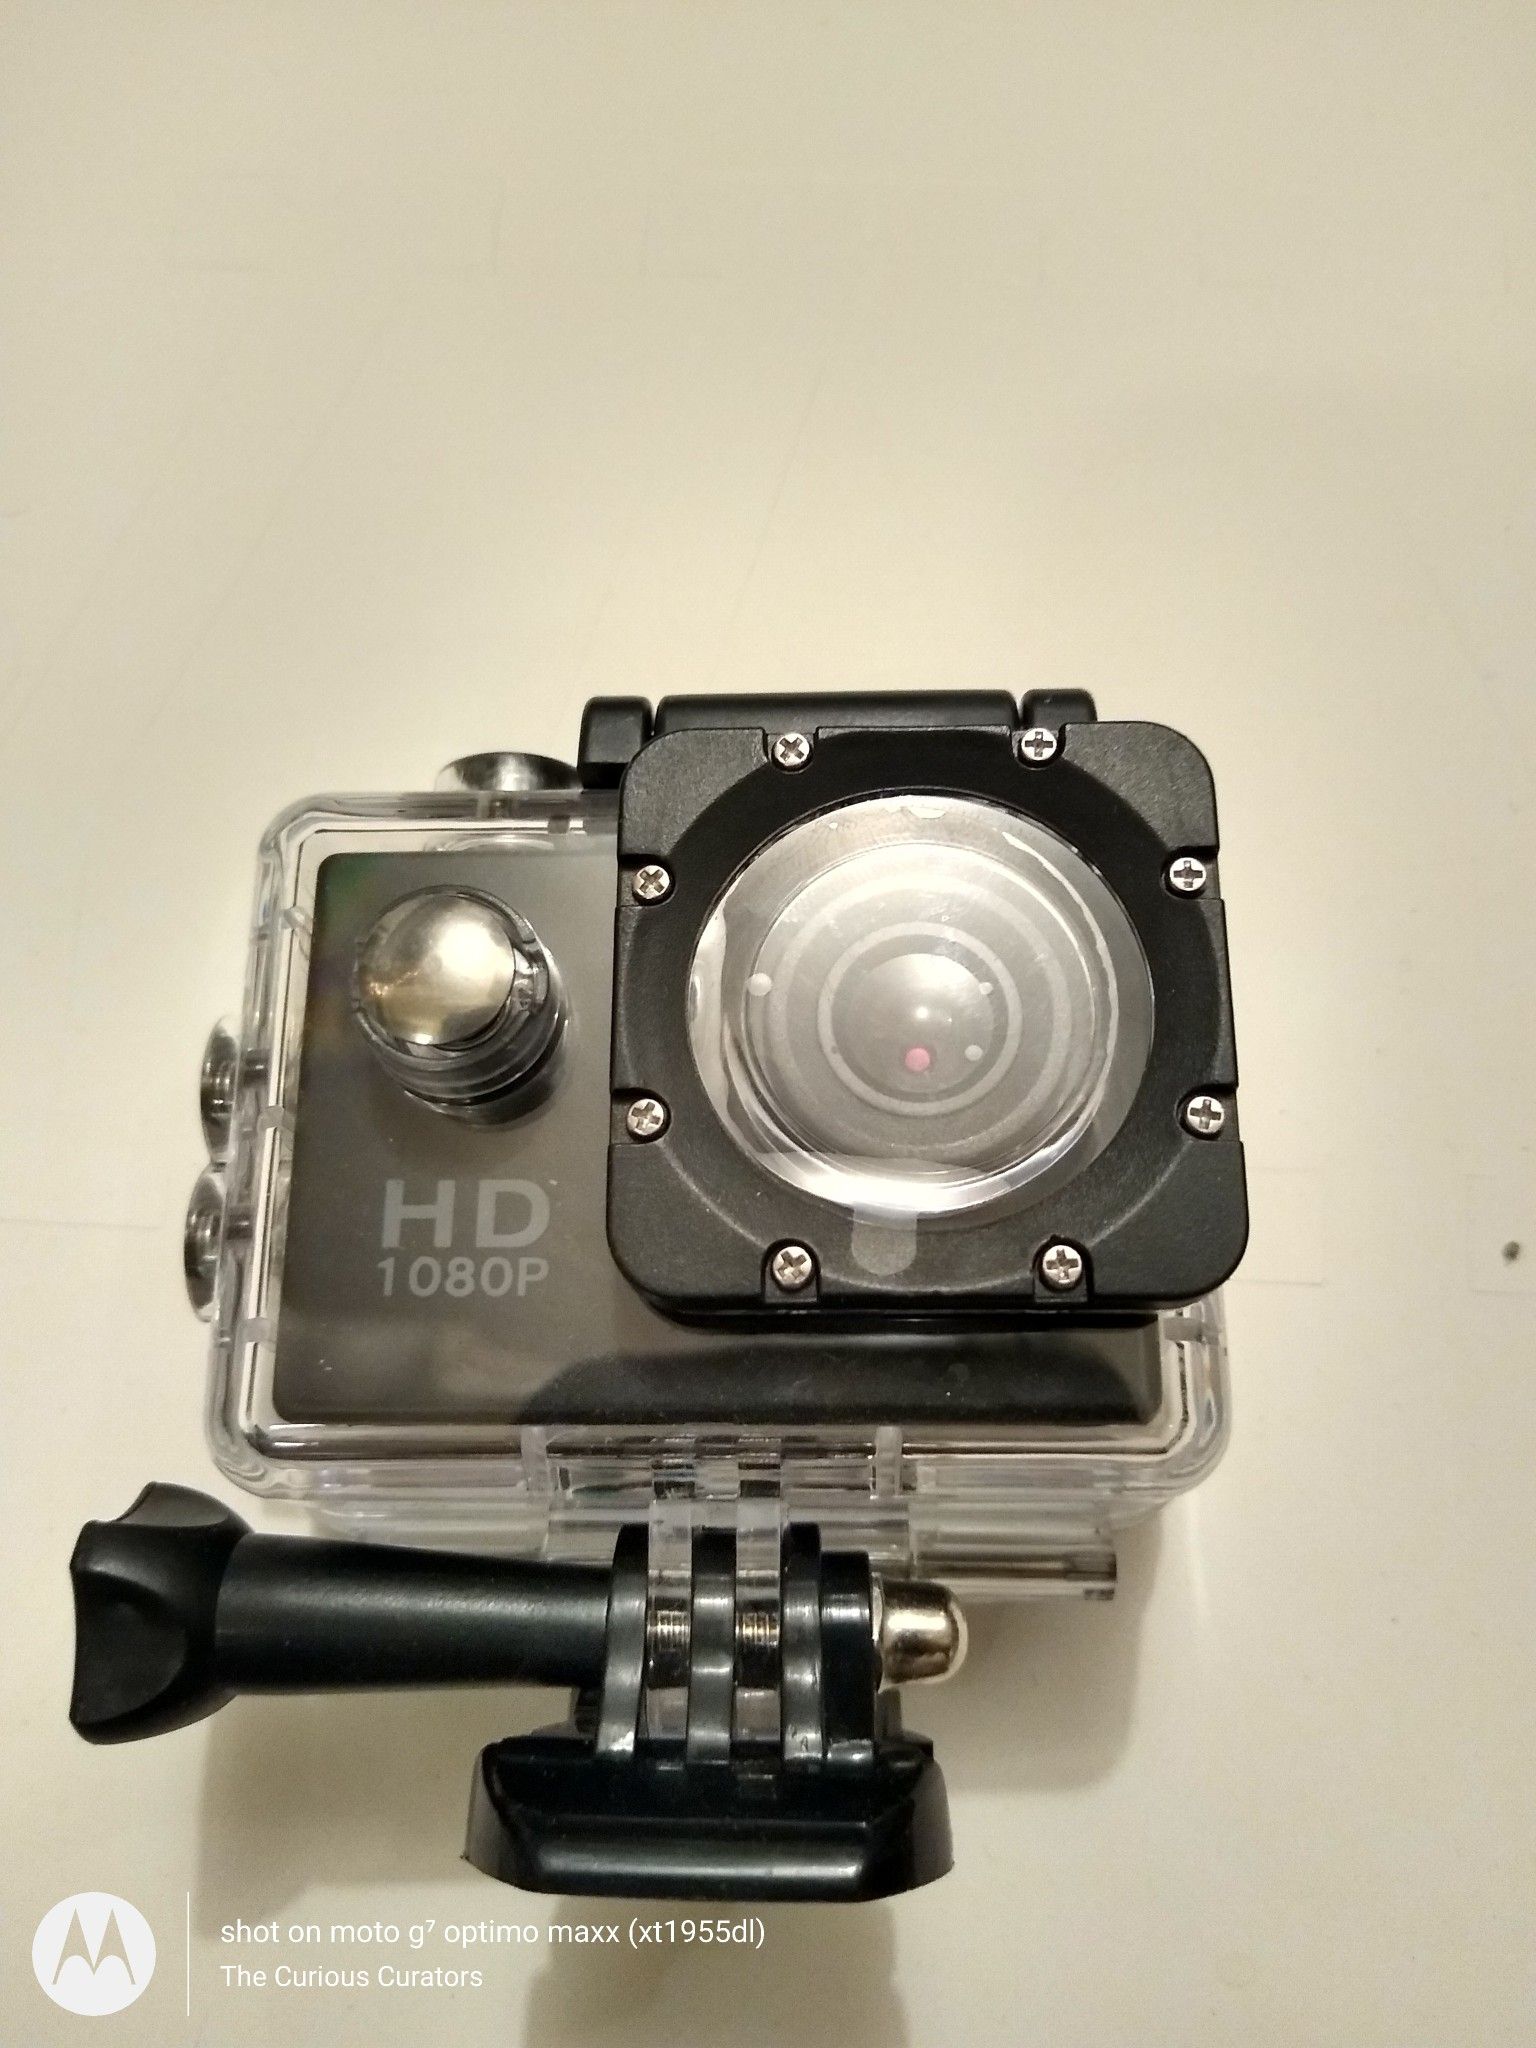 1080p HD Action Cam (Reboxed)